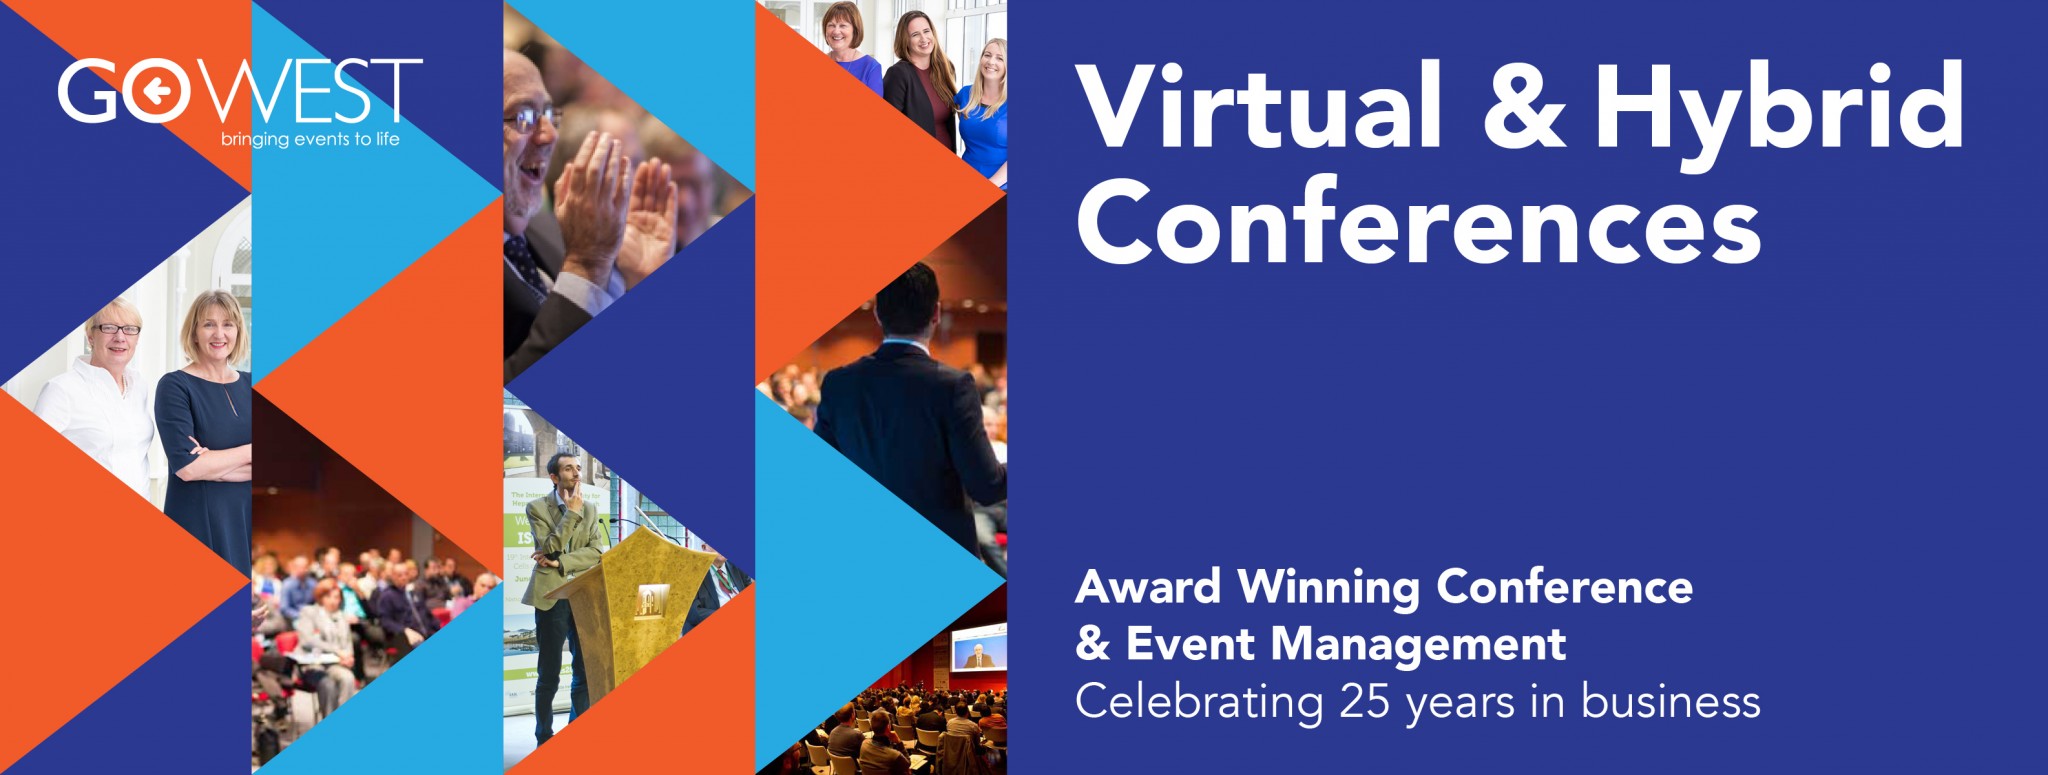 Virtual and Hybrid Conferences Go West